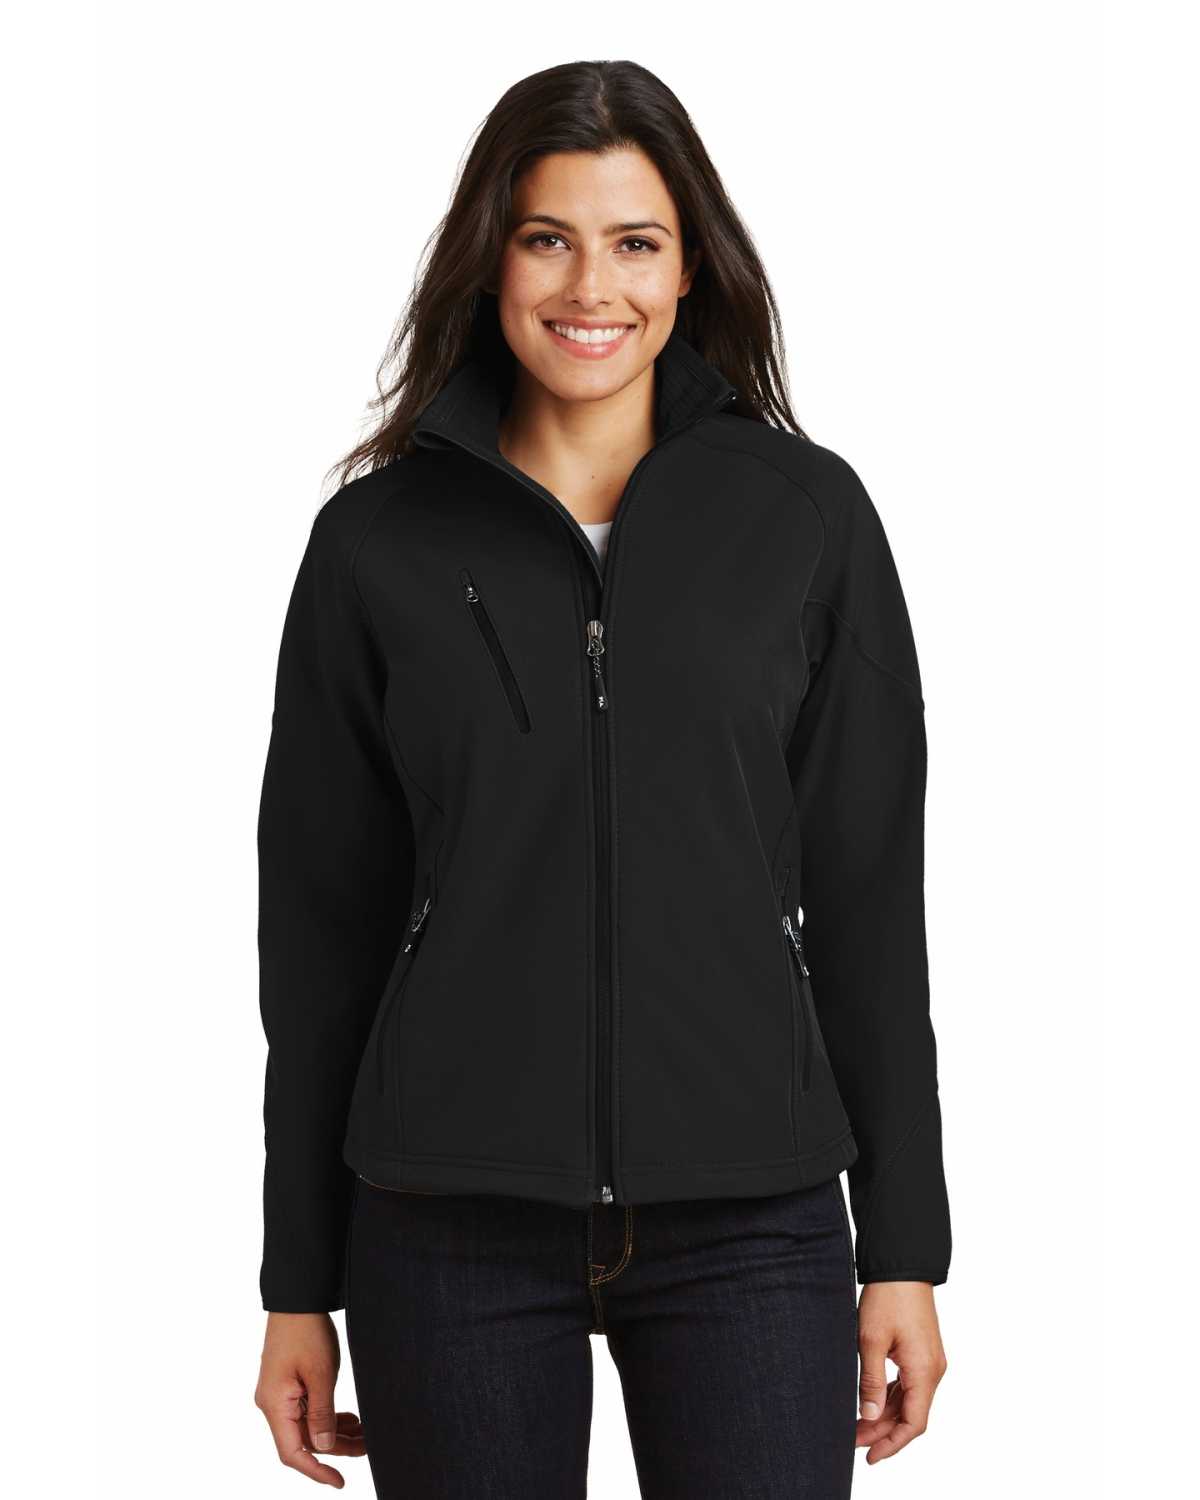 Port Authority L705 Ladies Textured Soft Shell Jacket on discount ...